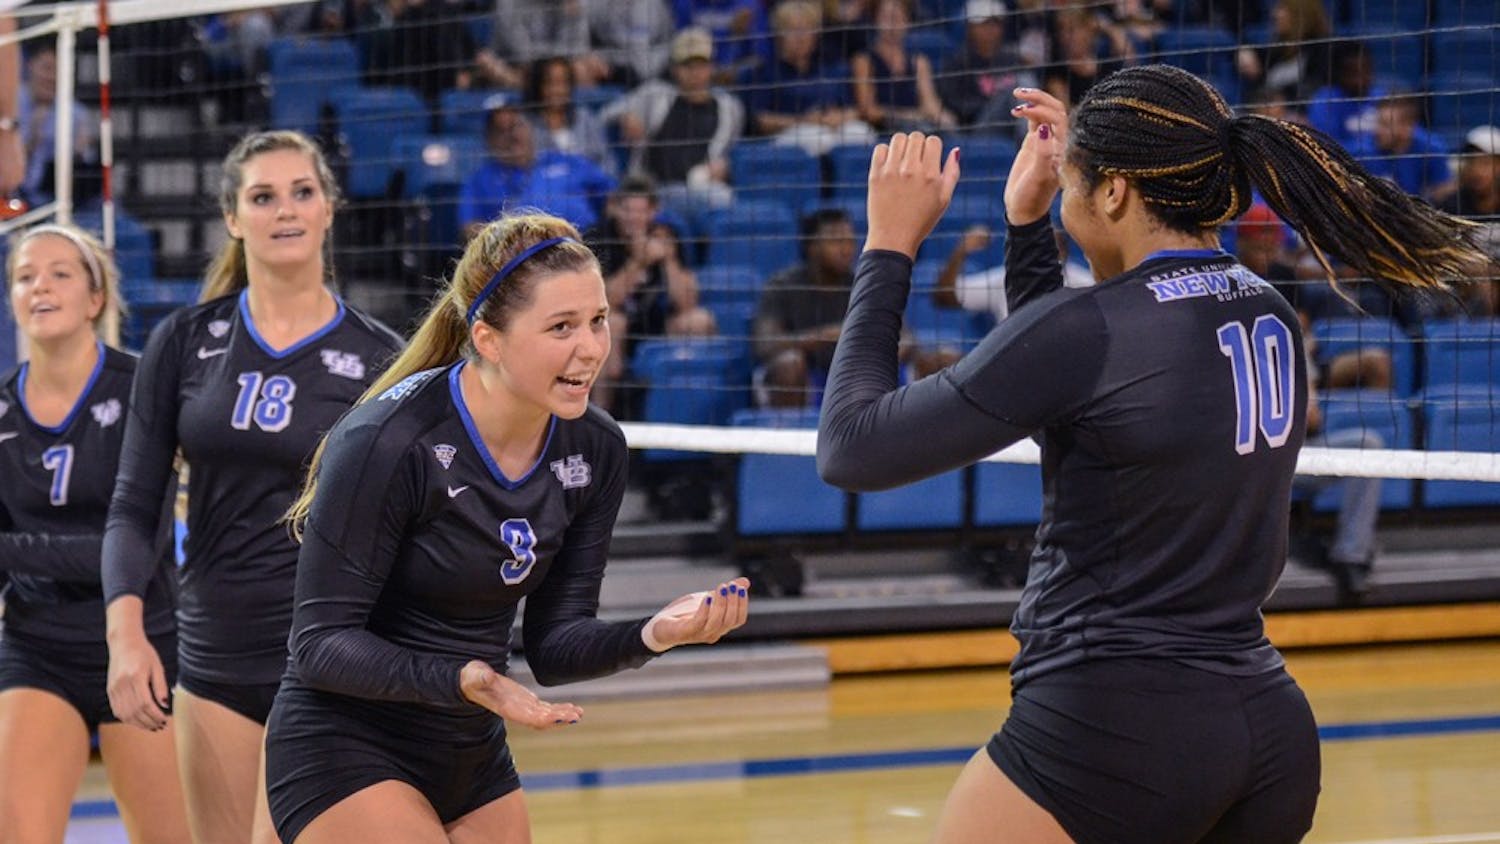 Senior Marissa Prinzbach (left)&nbsp;and senior Akelia Lain (right) celebrate a point from earlier in the season. The Bulls clinched the No. 7 seed in the MAC Tournament, their second berth in as many years.